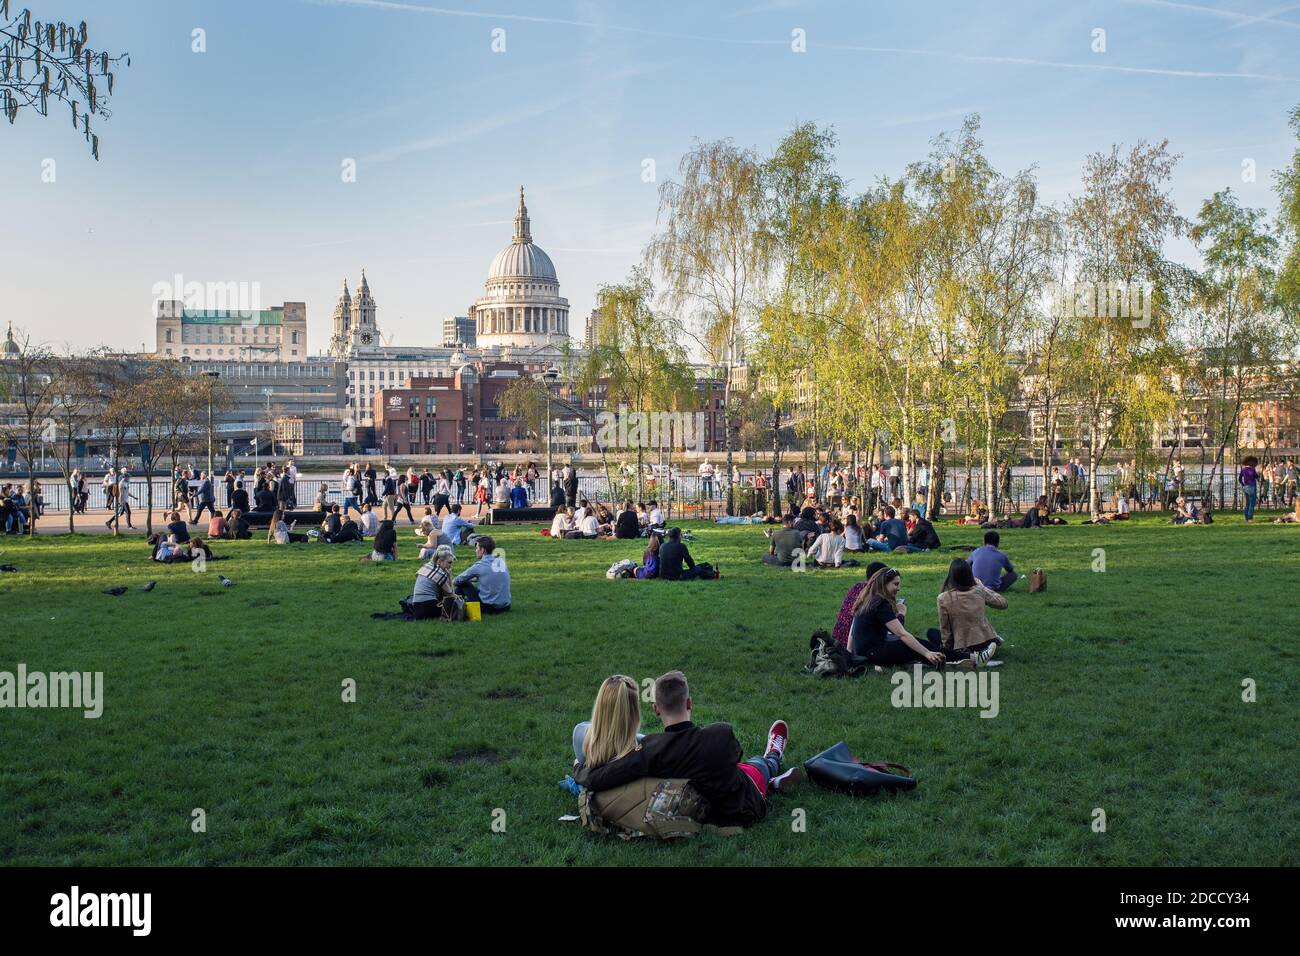 People enjoy a hot day on the lawn in front of the Tate Modern with a view across the River Thames, St Paul's Cathedral, London,UK Stock Photo